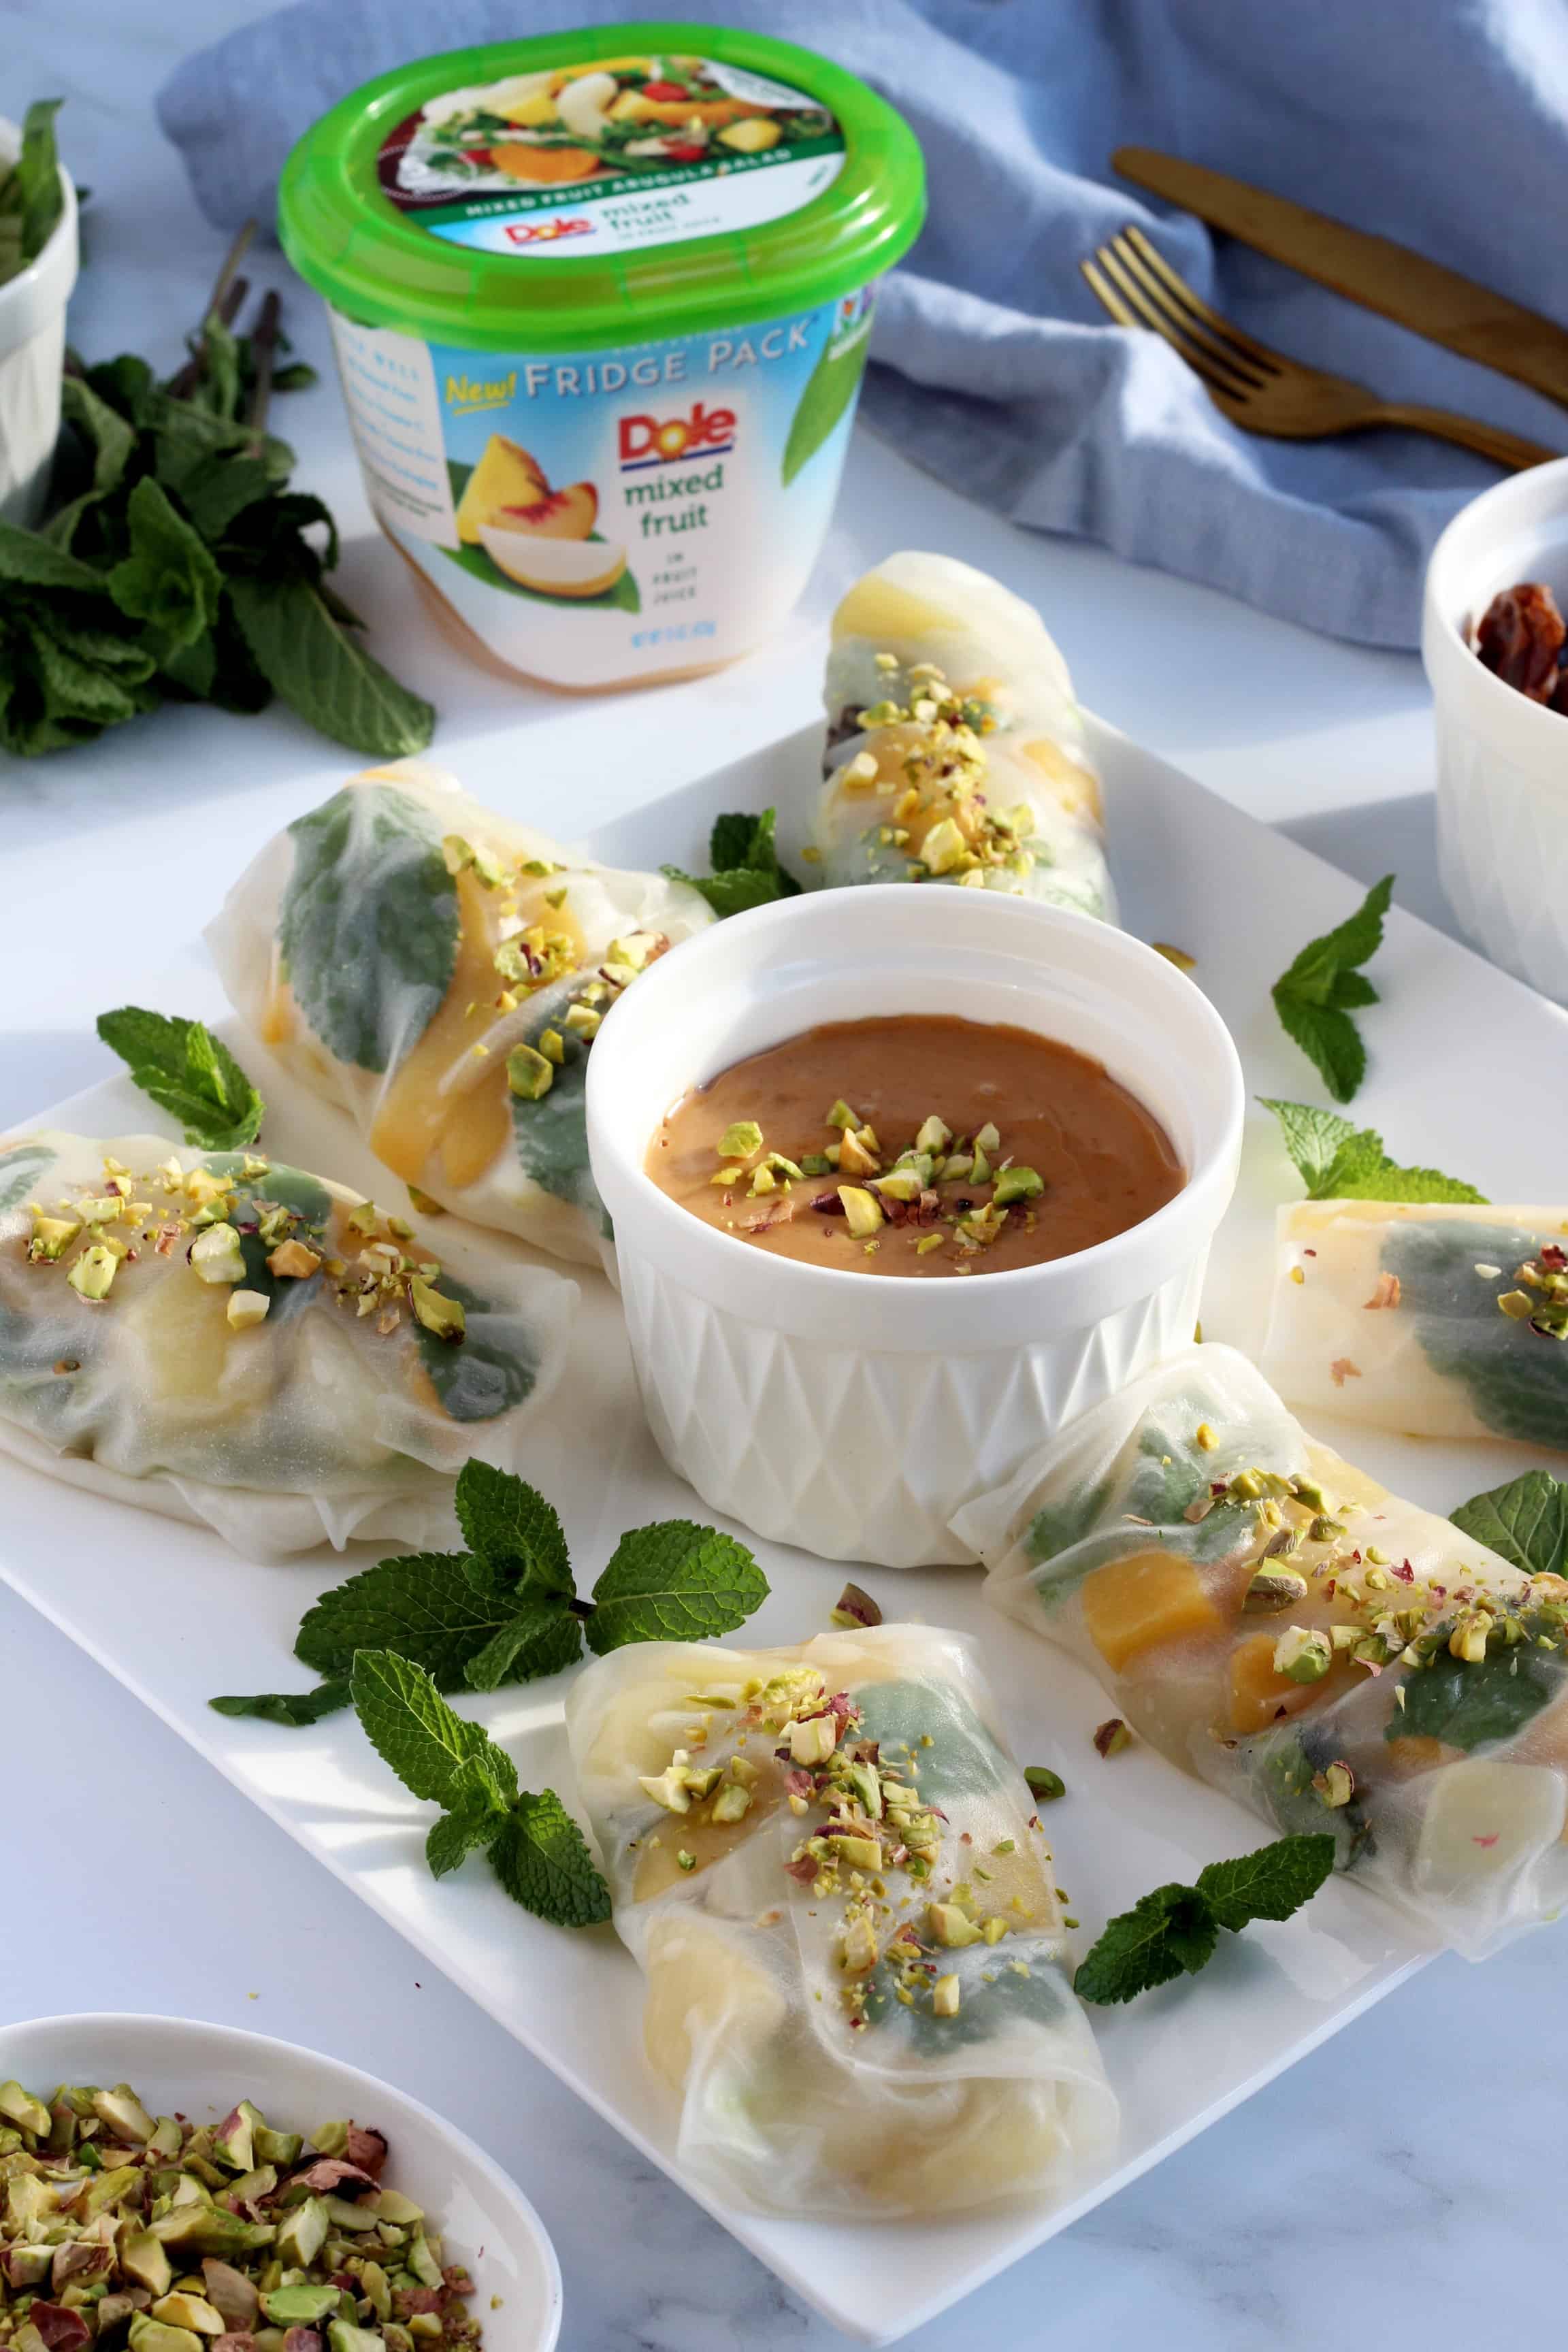 spring rolls with  Dole Mixed Fruit Fridge Pack 